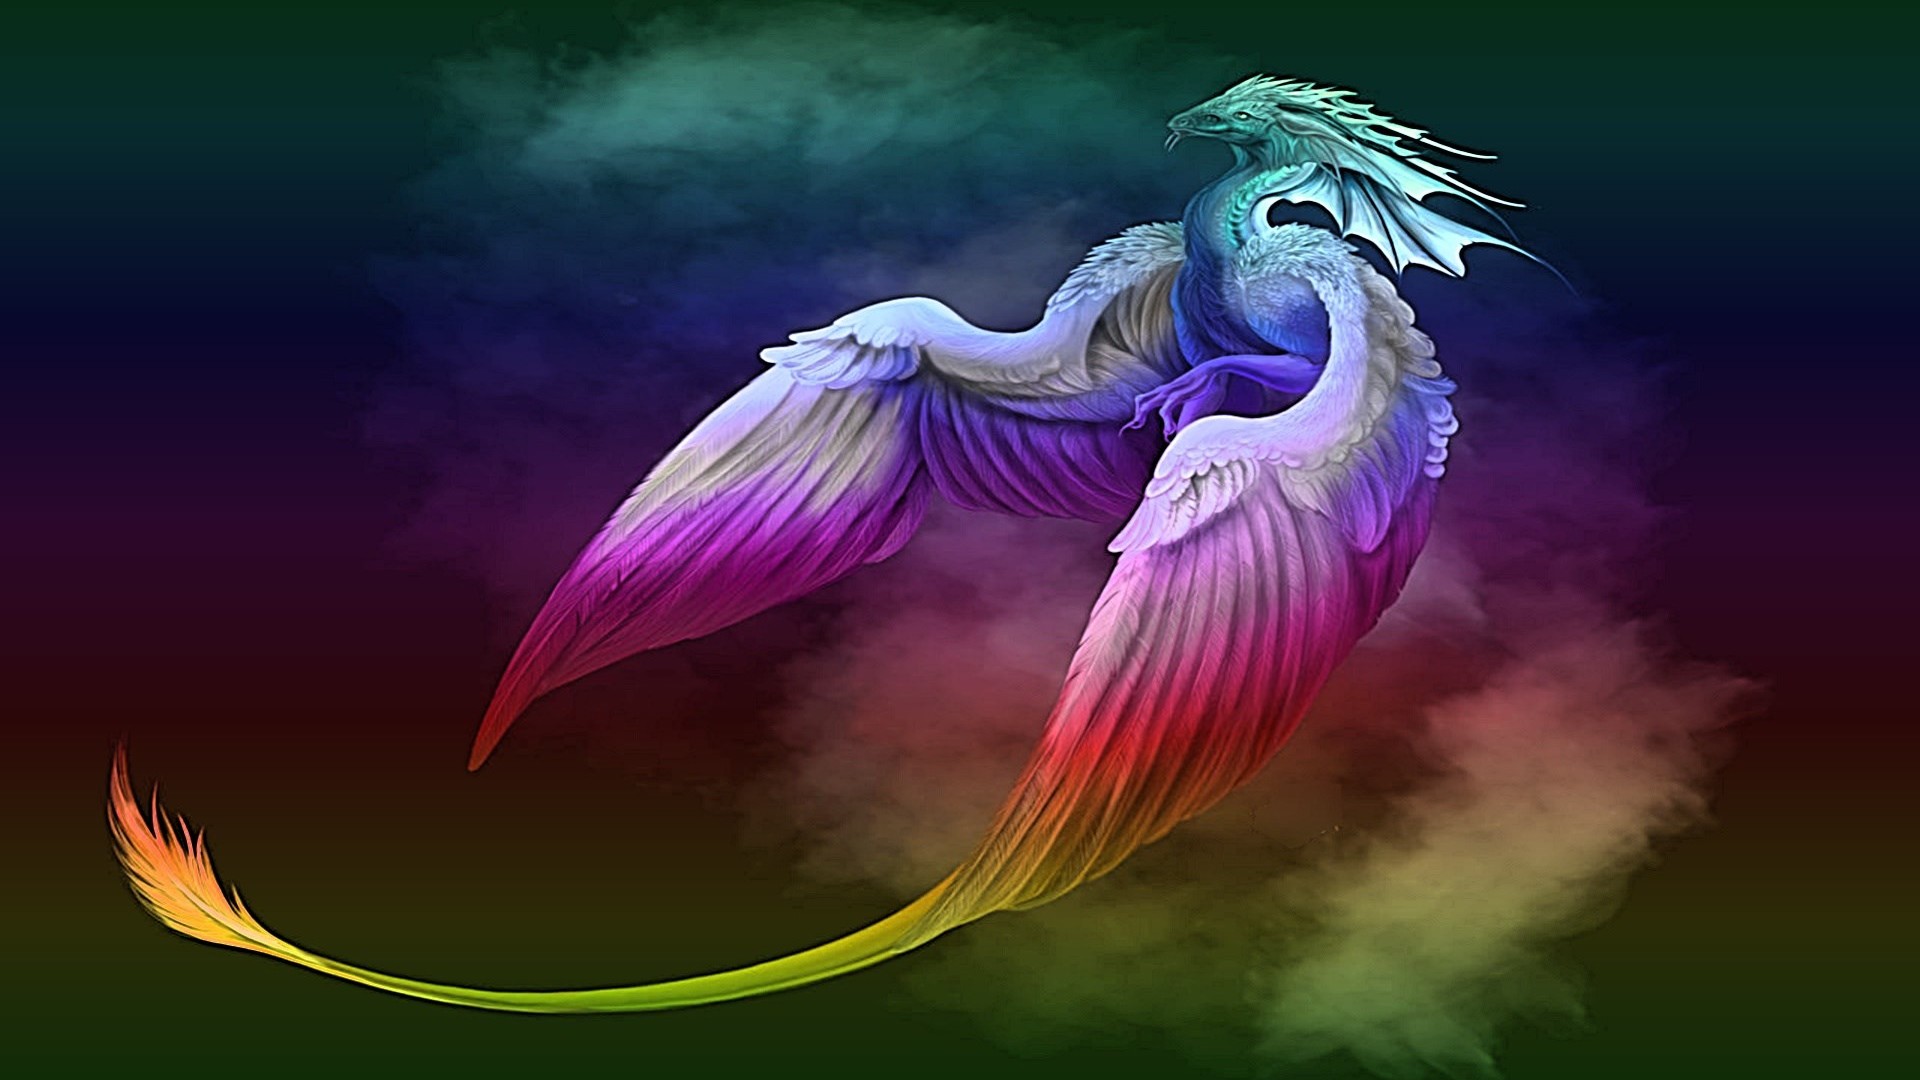 Ice Phoenix Background Wallpaper HD with image resolution 1920x1080 pixel. You can make this wallpaper for your Desktop Computer Backgrounds, Mac Wallpapers, Android Lock screen or iPhone Screensavers